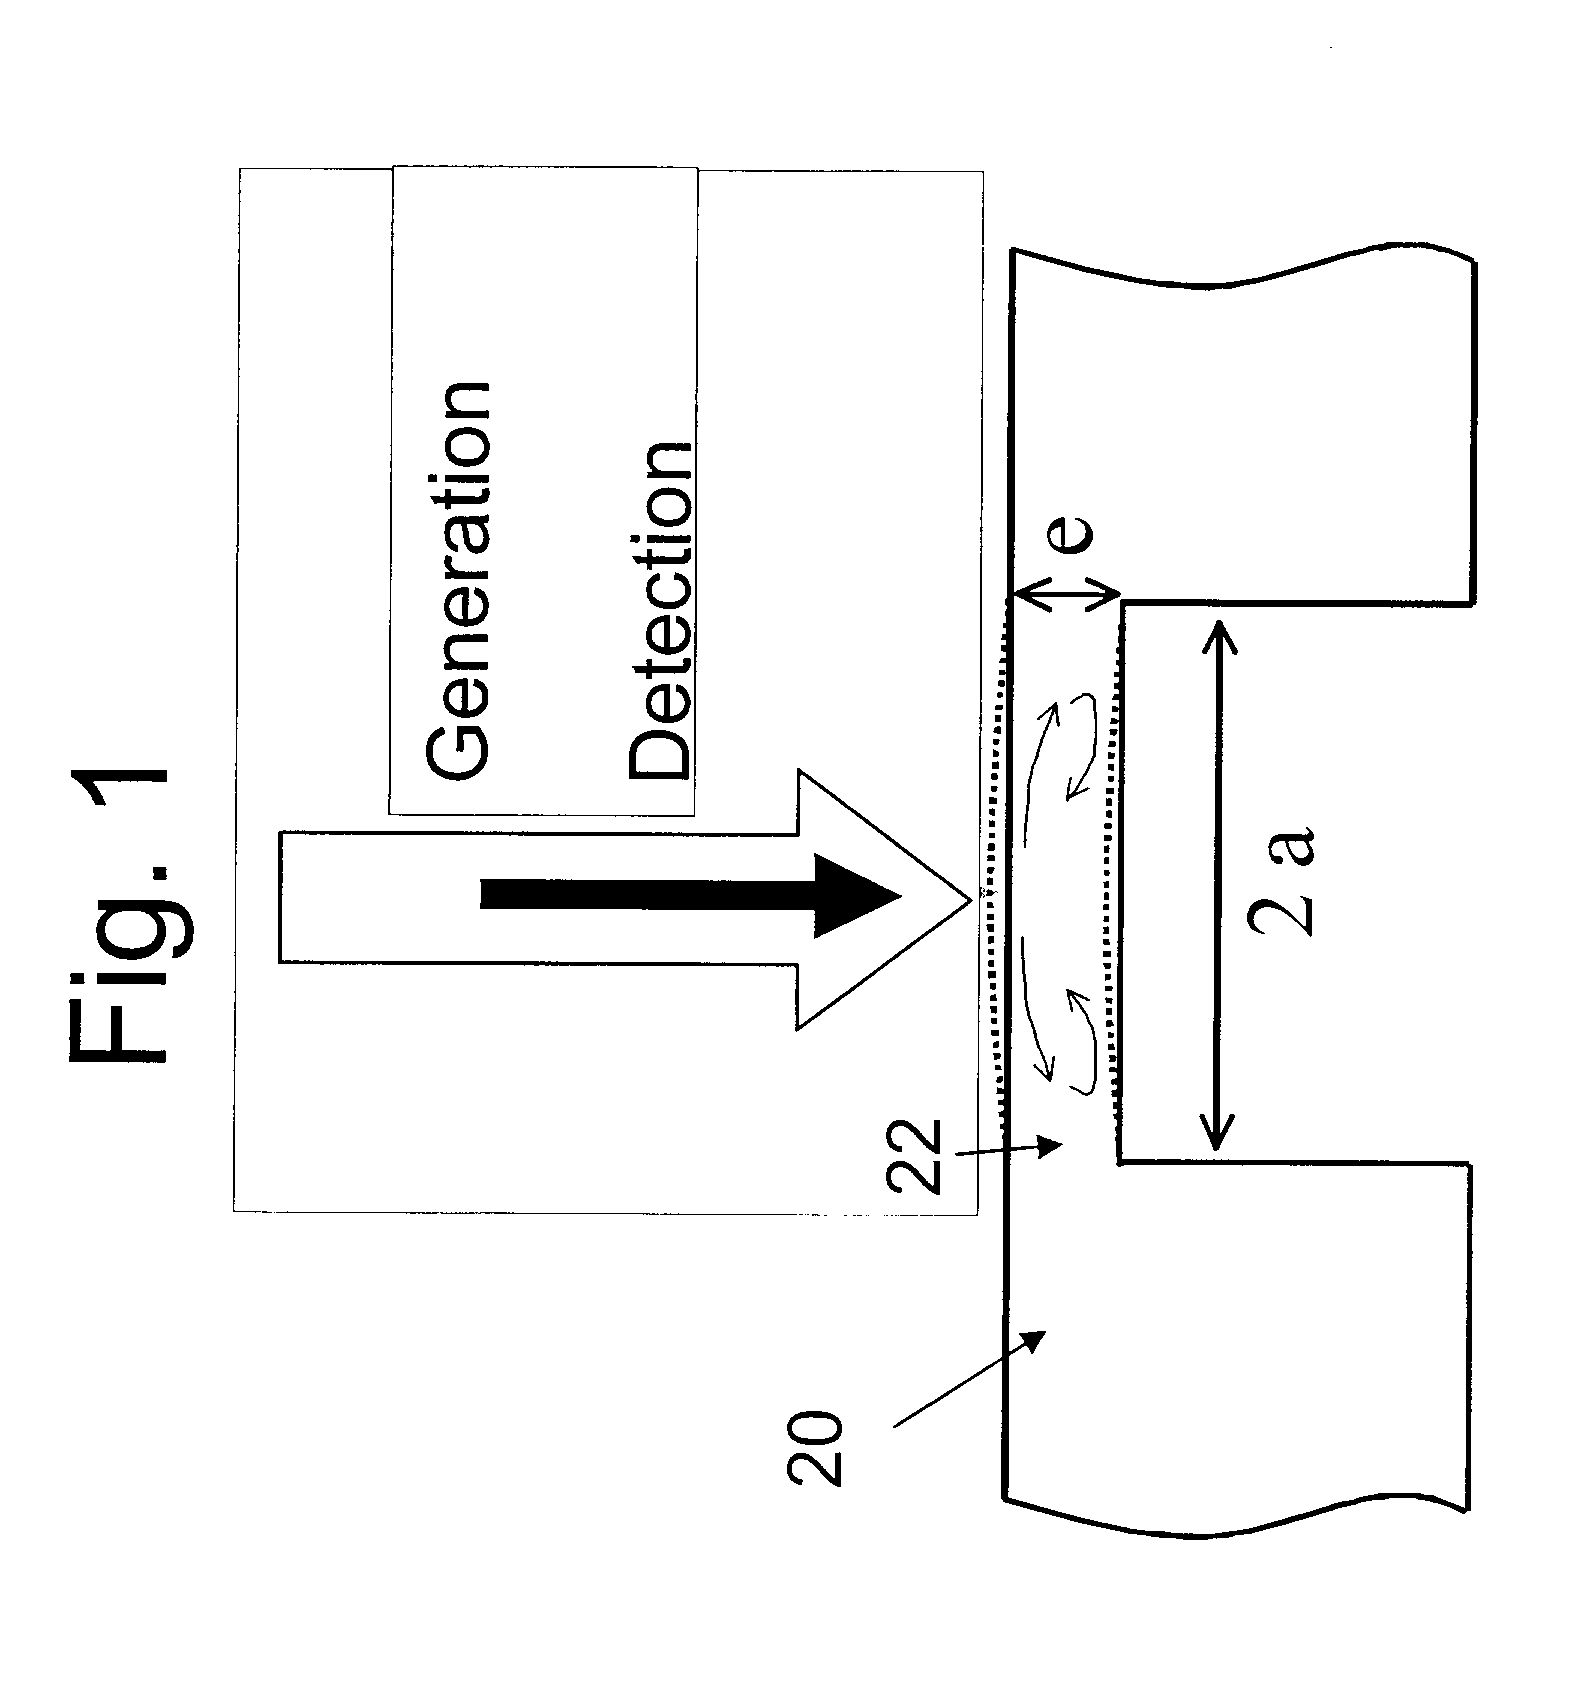 Method of Assessing Bond Integrity in Bonded Structures